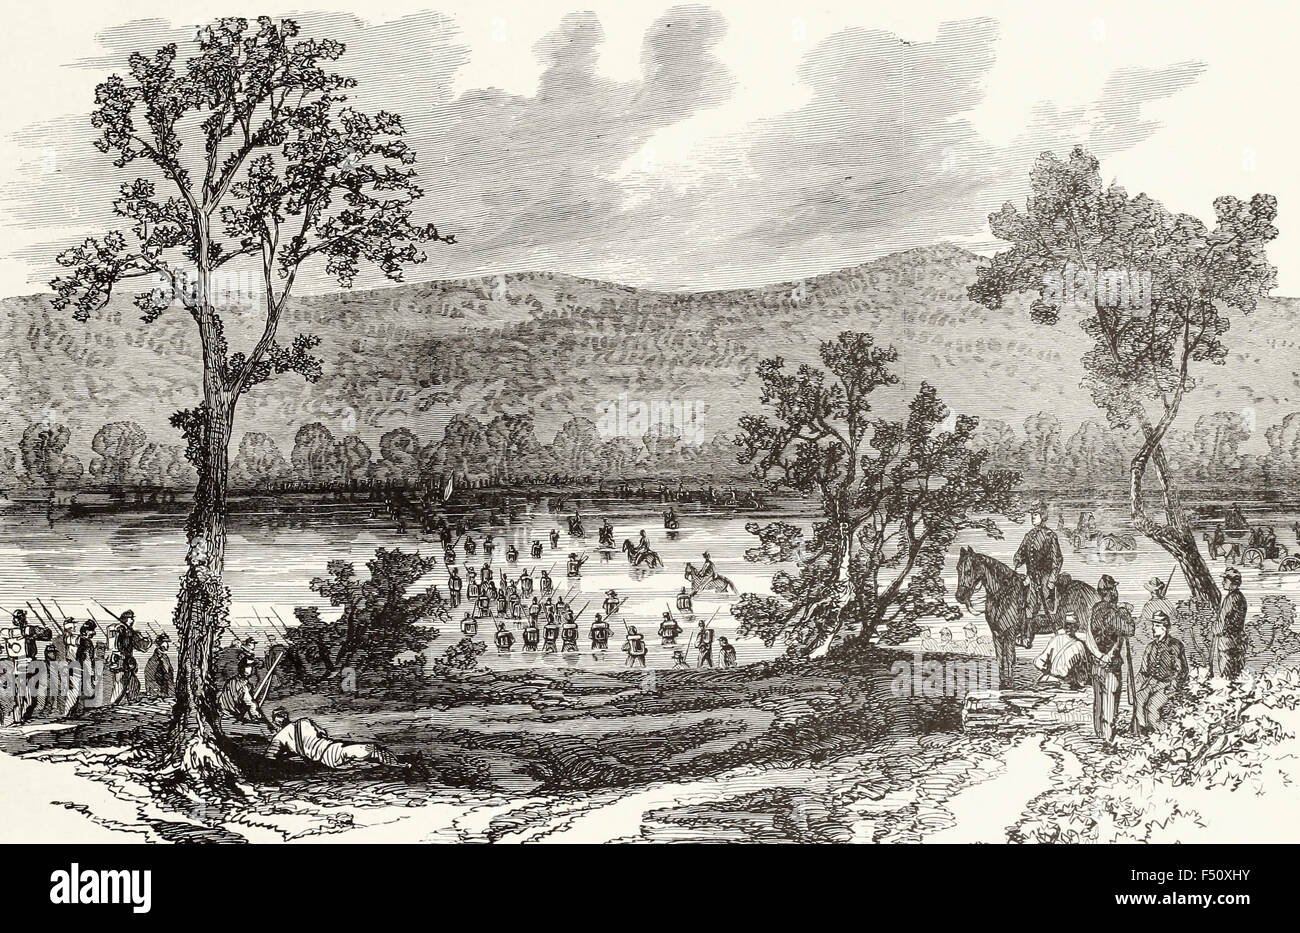 The War in Georgia - The Seventeenth Army Corps fording the Chattahoochee at Boswell's Ferry, July 19th, 1864. USA Civil War Stock Photo